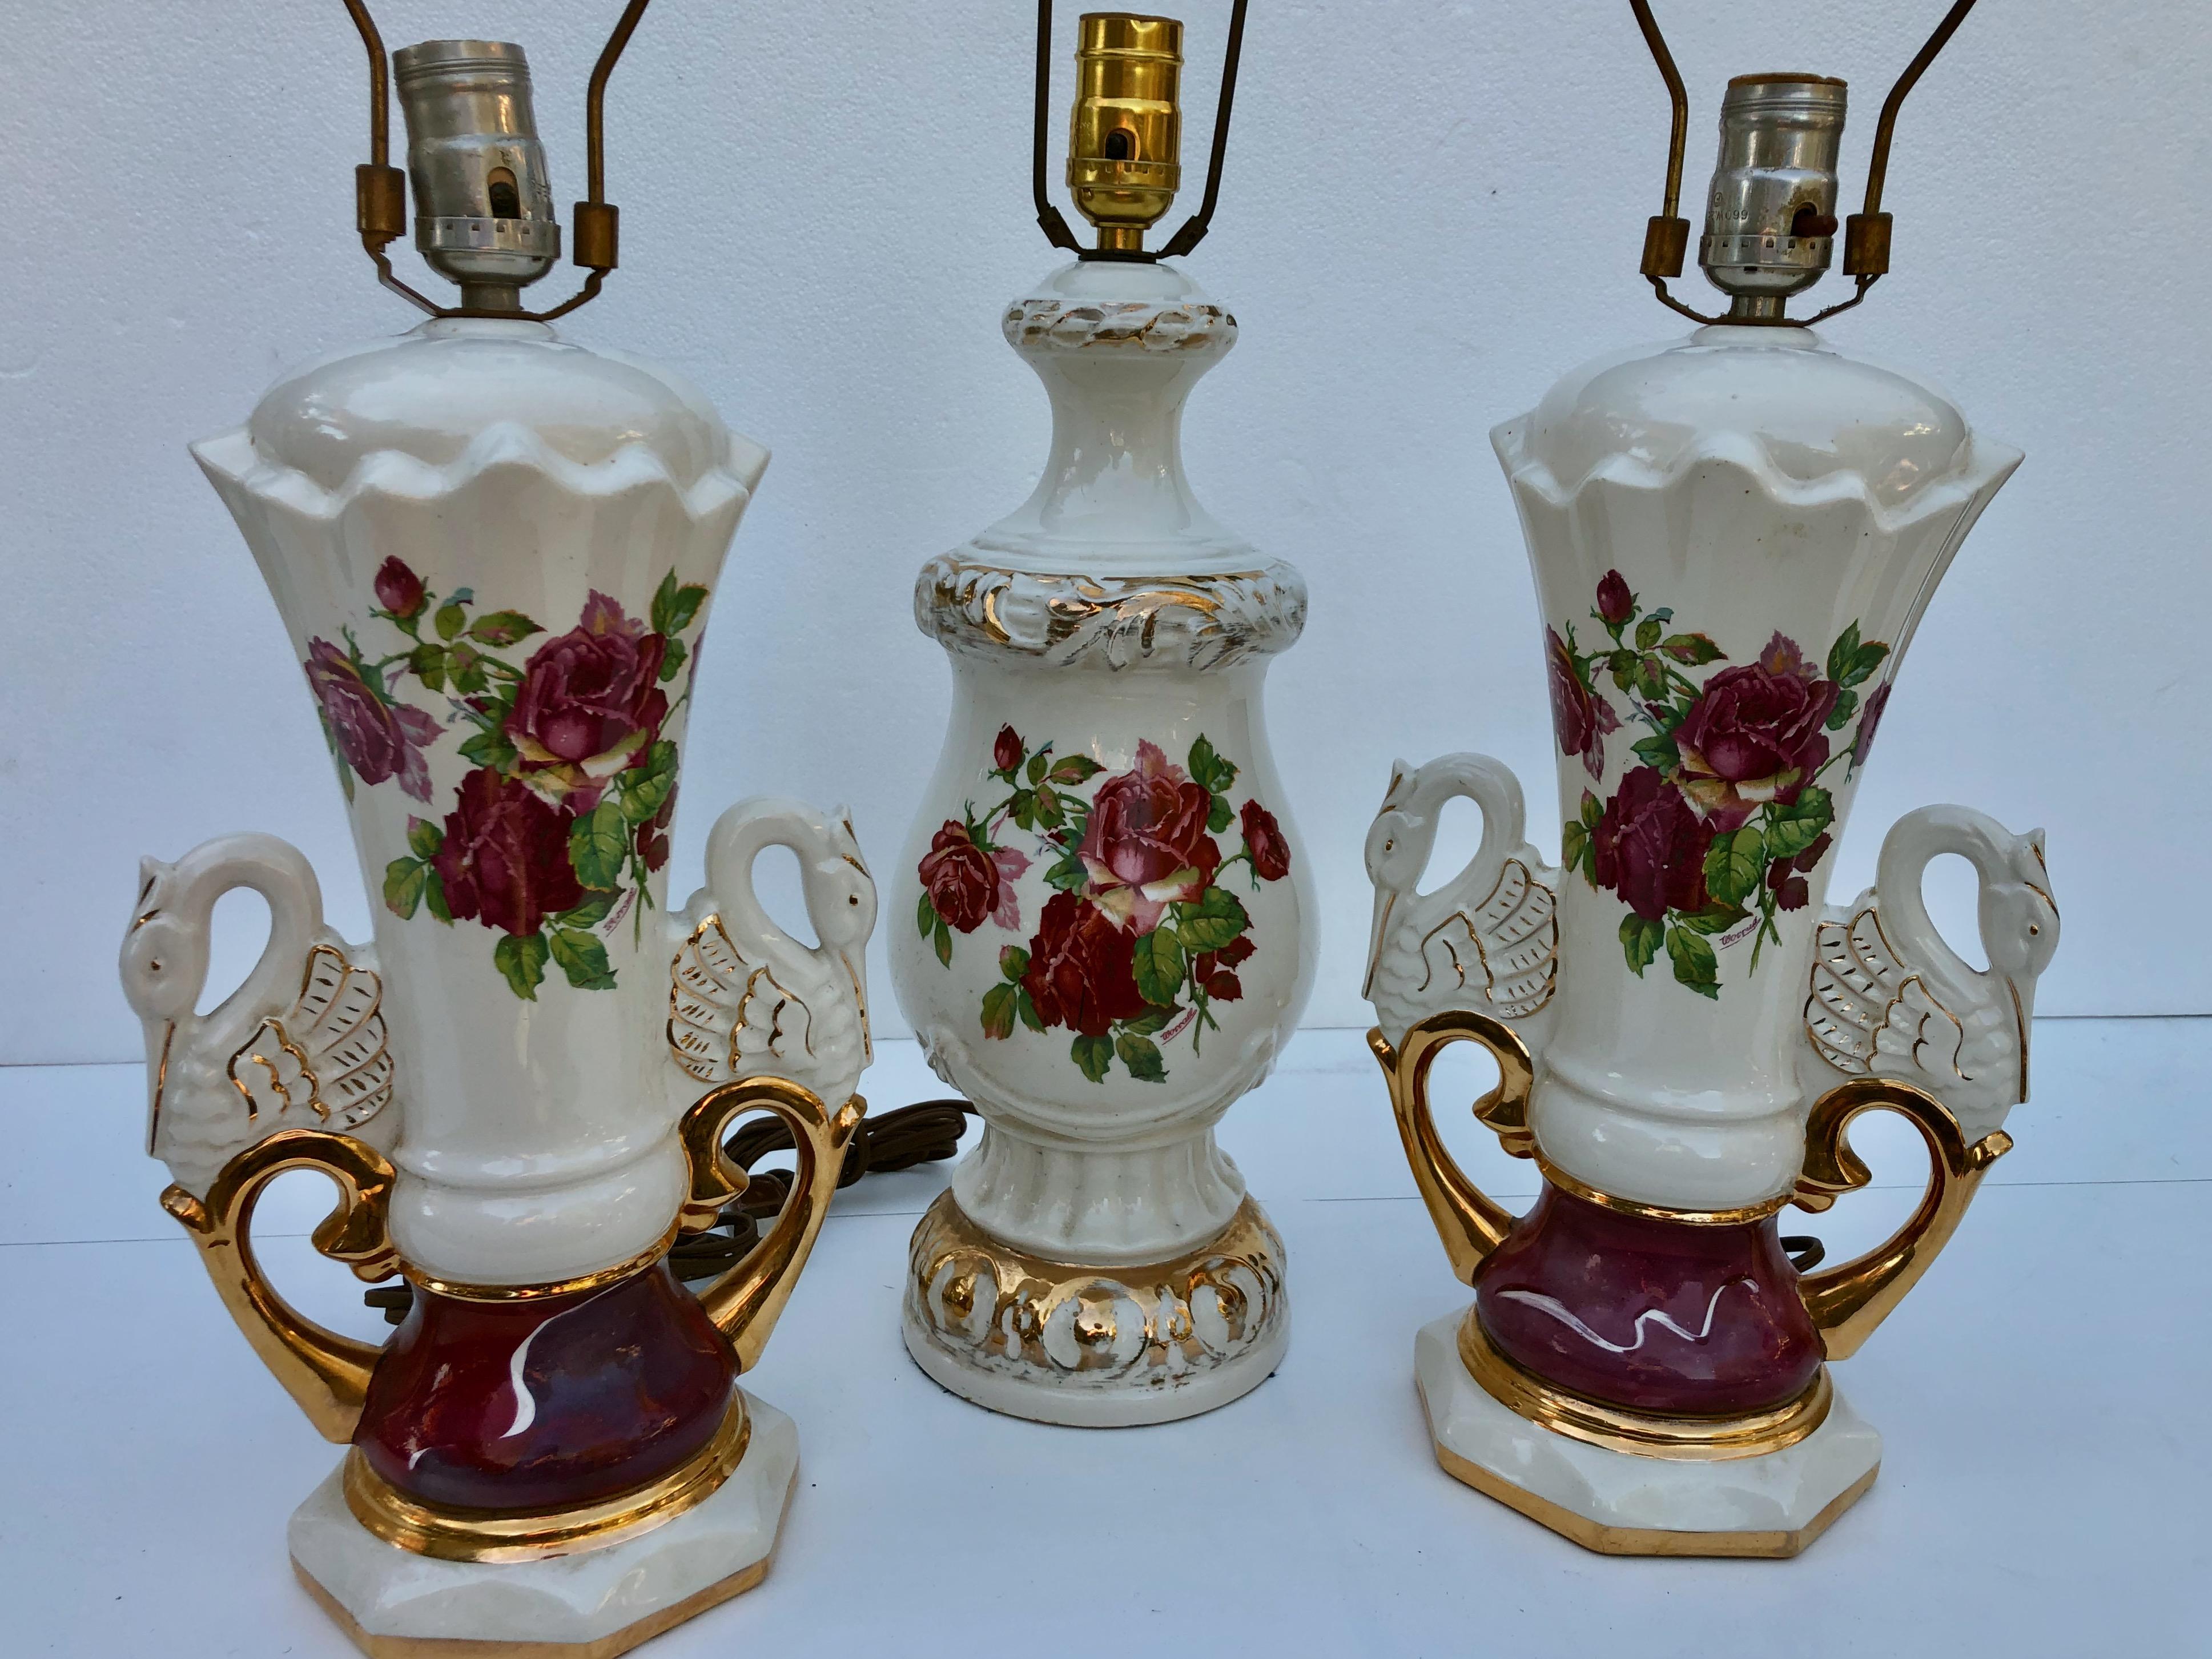 This is a lovely set of three Jenny Worall hand painted ceramic table lamps. Two of the lamps are a matched set with swan handles and all have a rose floral motif painted in shades of pink with gold trim.

Matching swan handle set: H 16.5 x W 7.5